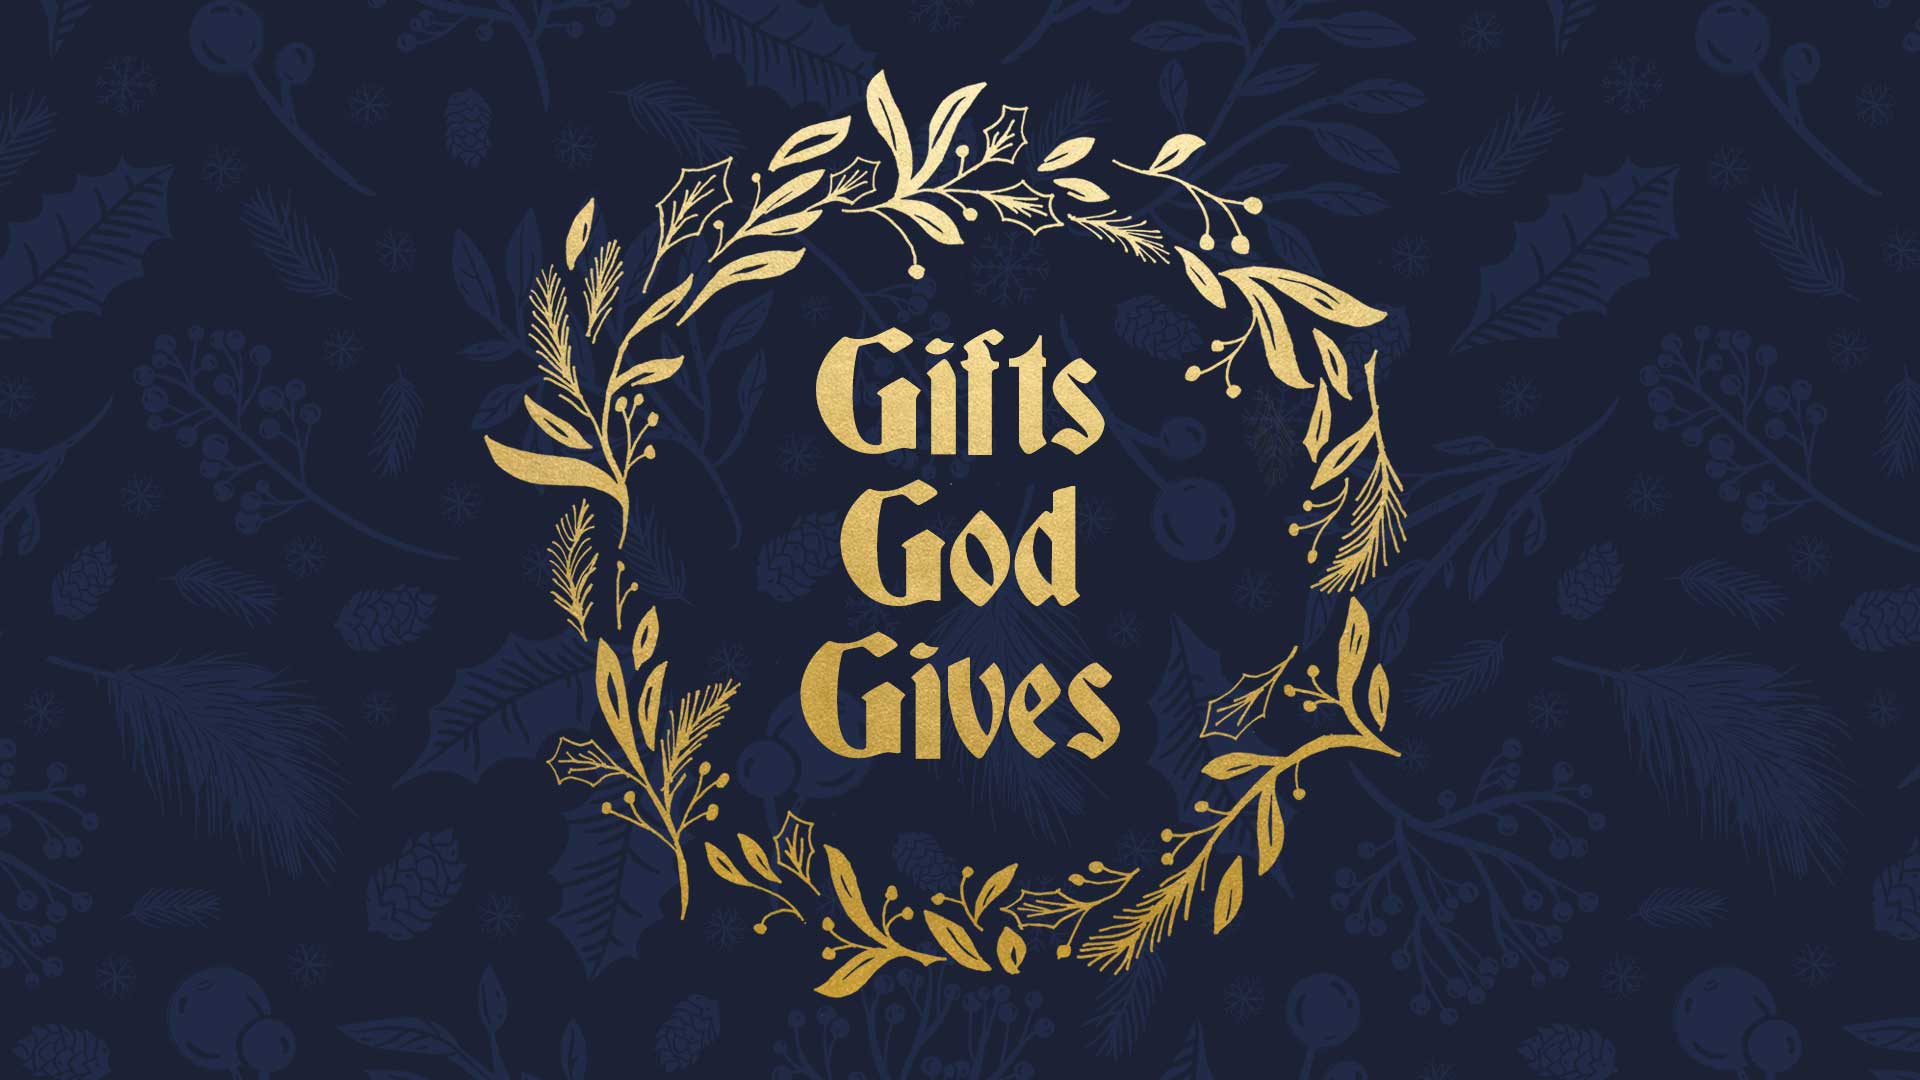 Gifts God Gives - James River Church Online